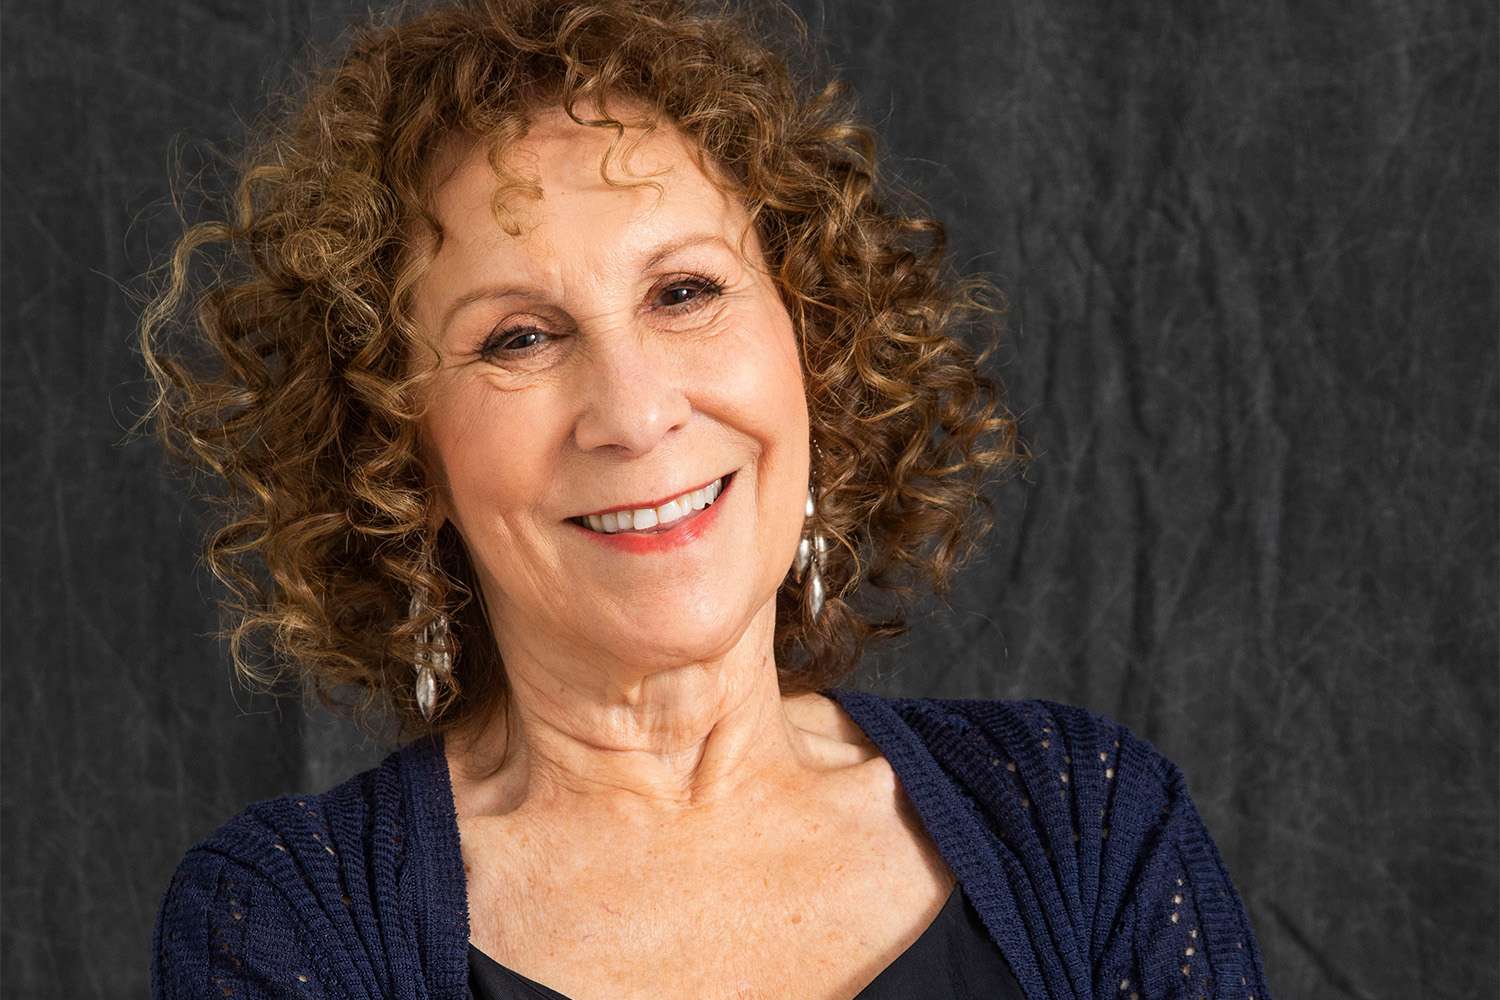 Rhea Perlman wearing a blue jacket with a smile